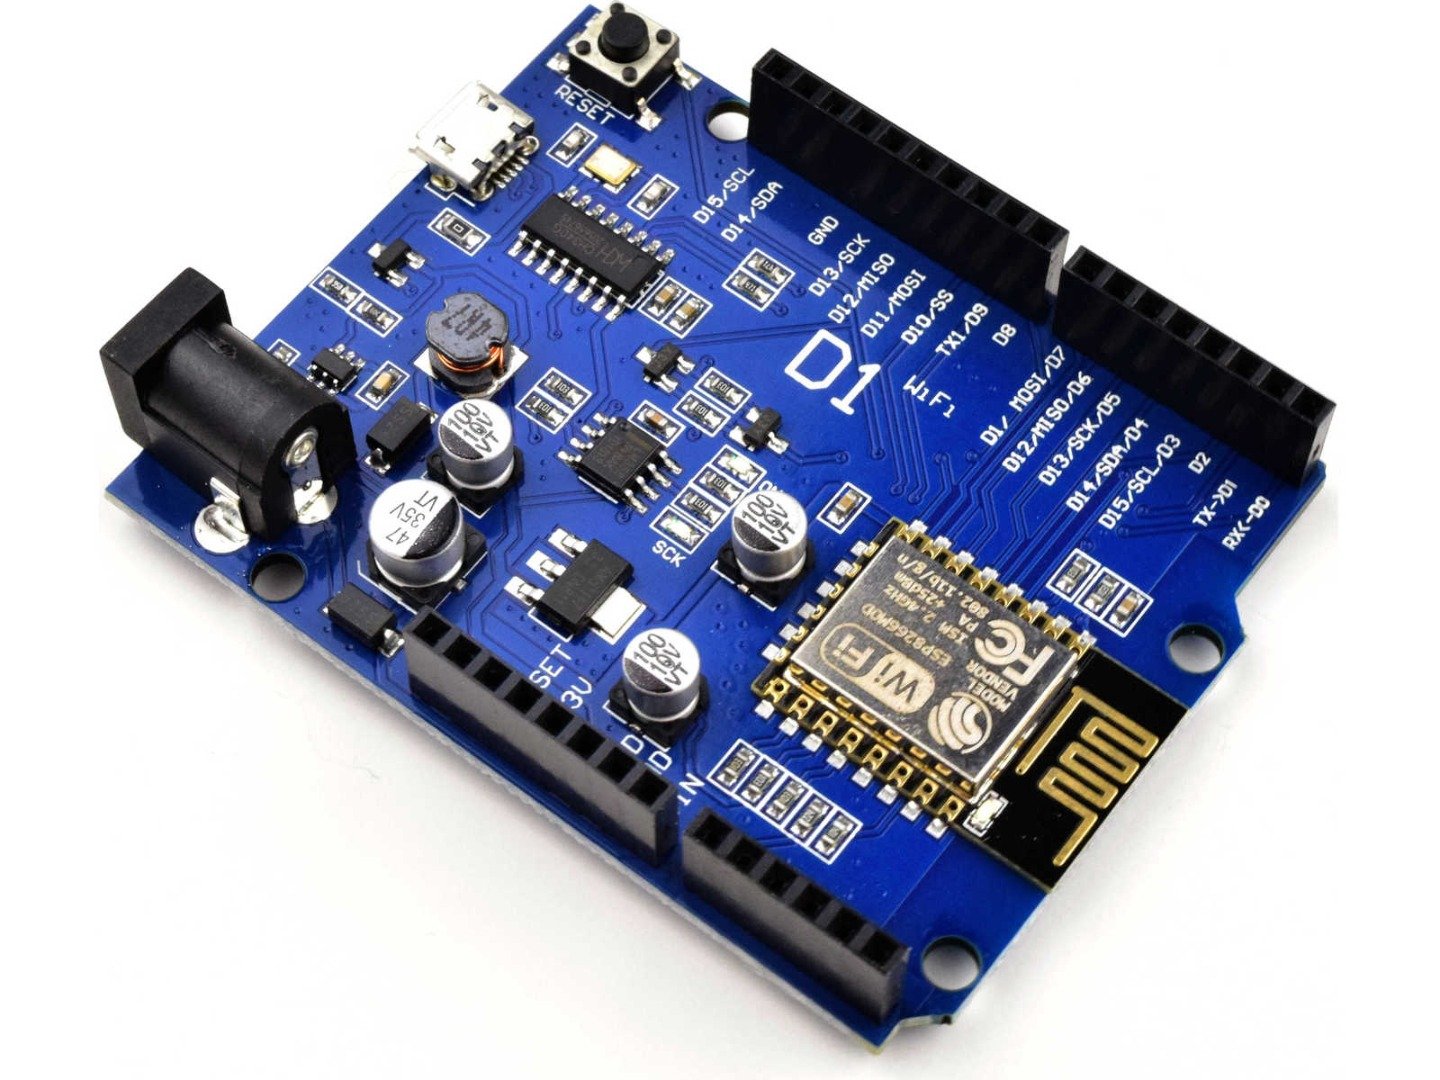 WEMOS D1 ESP8266 Wi-Fi Board 80-160MHz – IoT – compatible with Arduino and NodeMCU 9